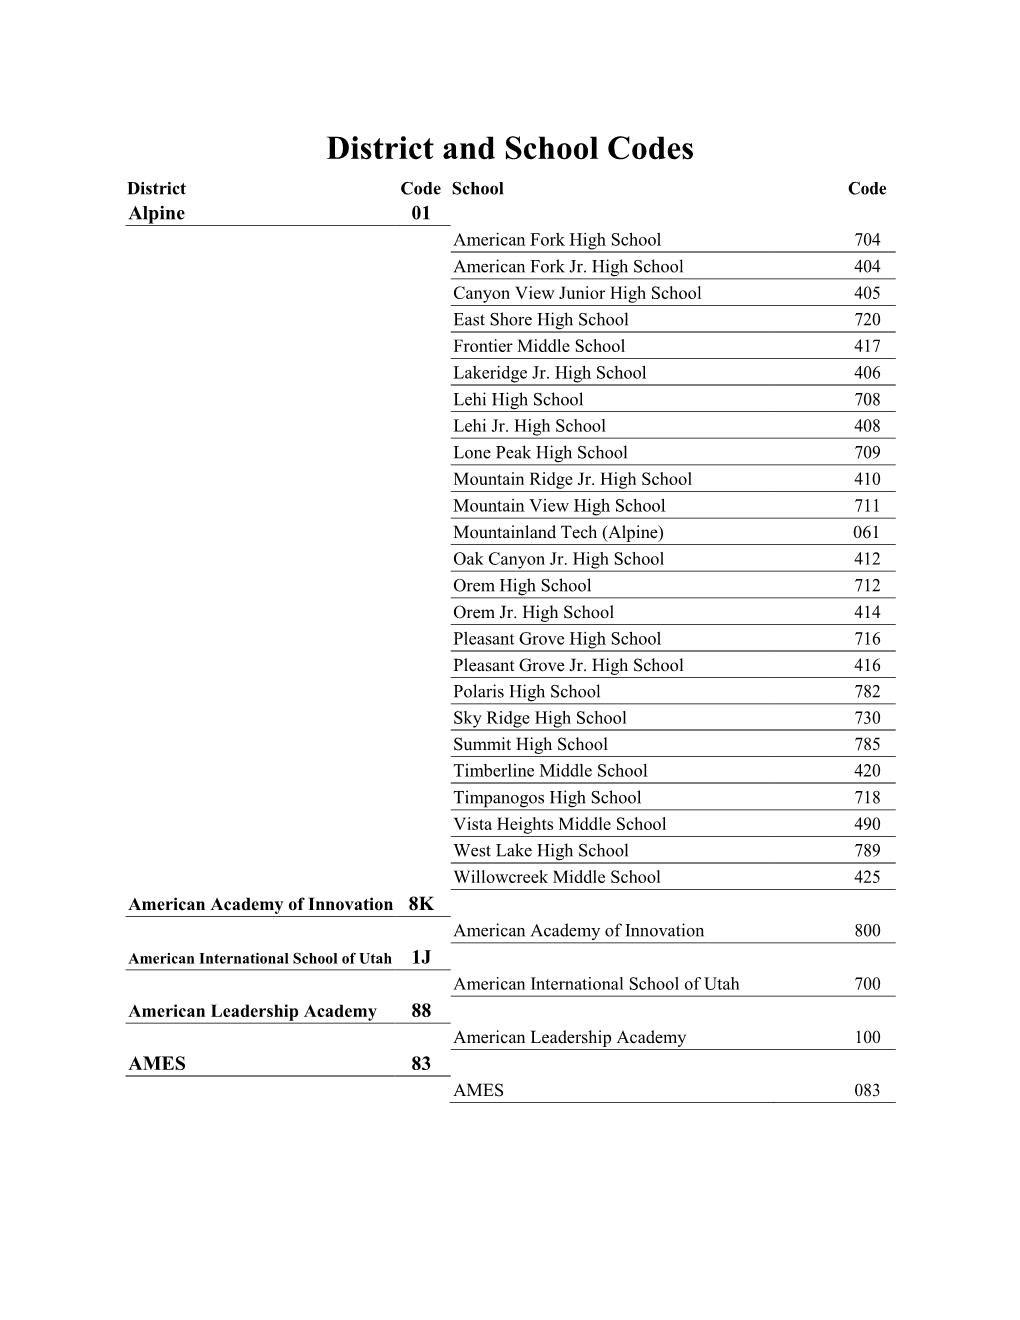 District and School Codes (PDF File)